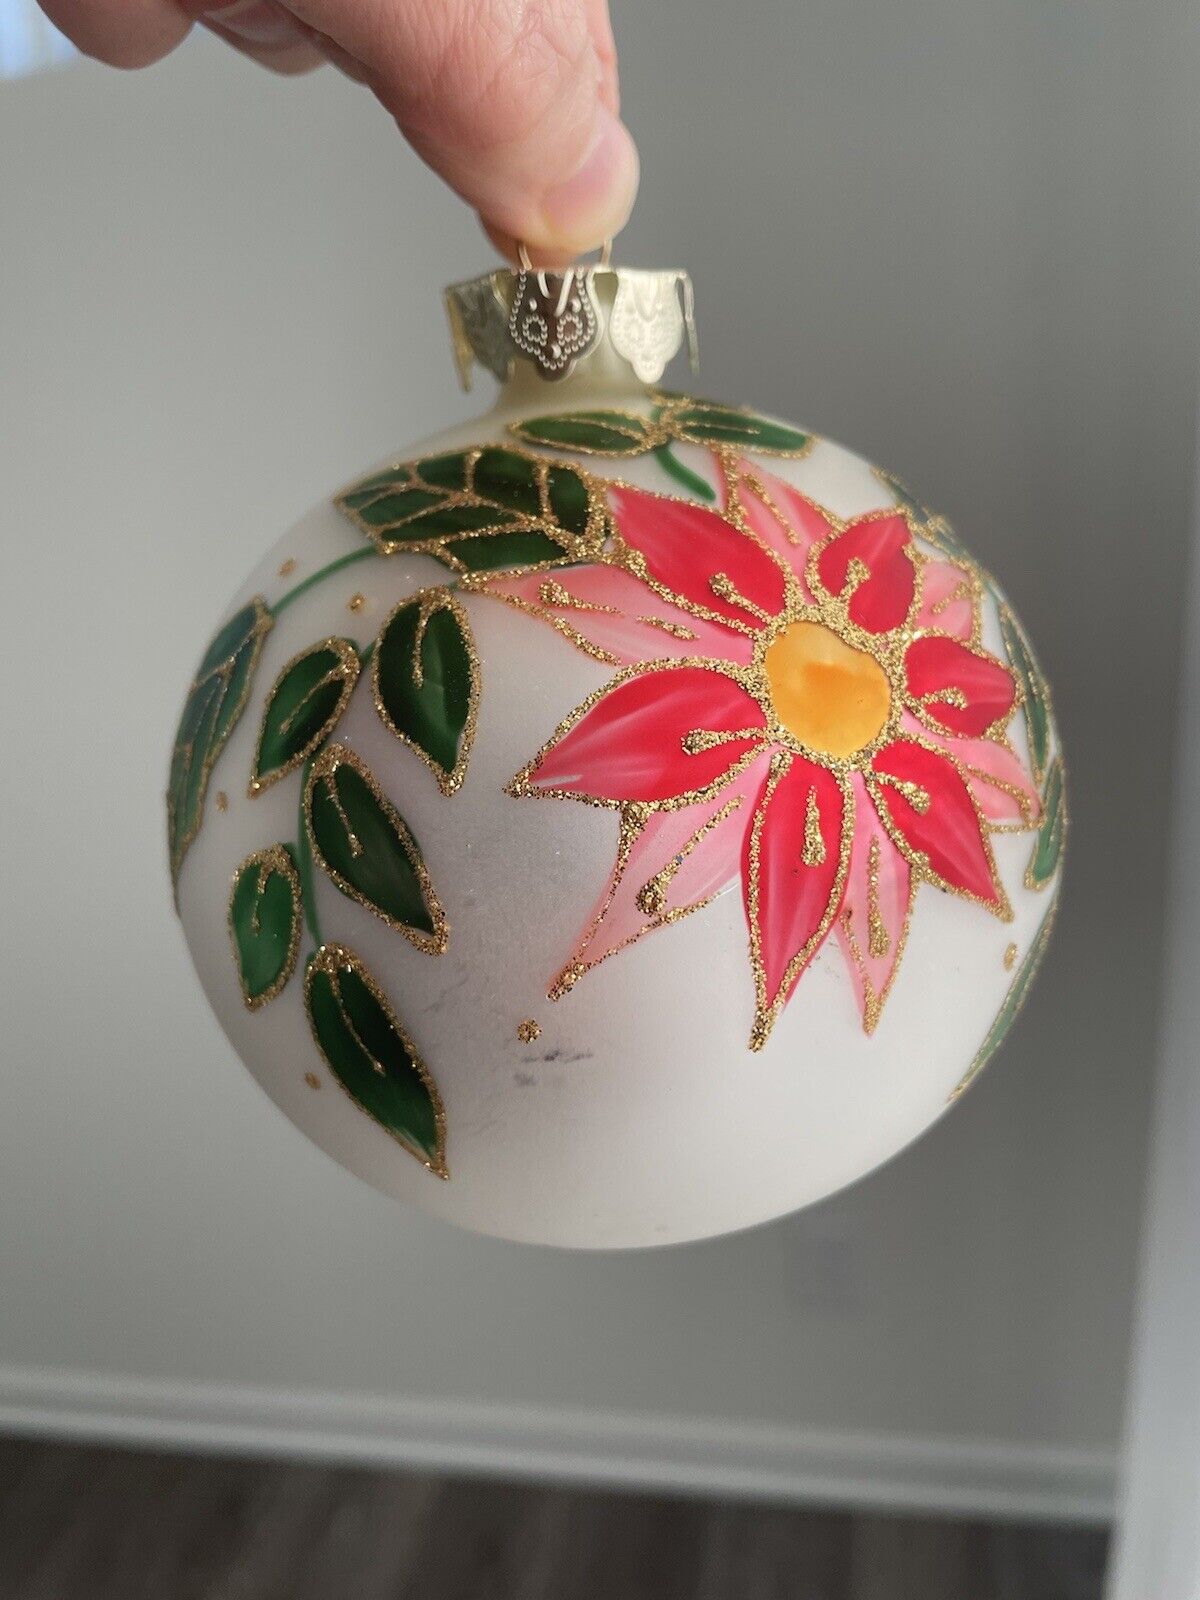 VTG Hand Painted Glass Christmas Ornament Poinsettia Ball Glitter Accents Floral